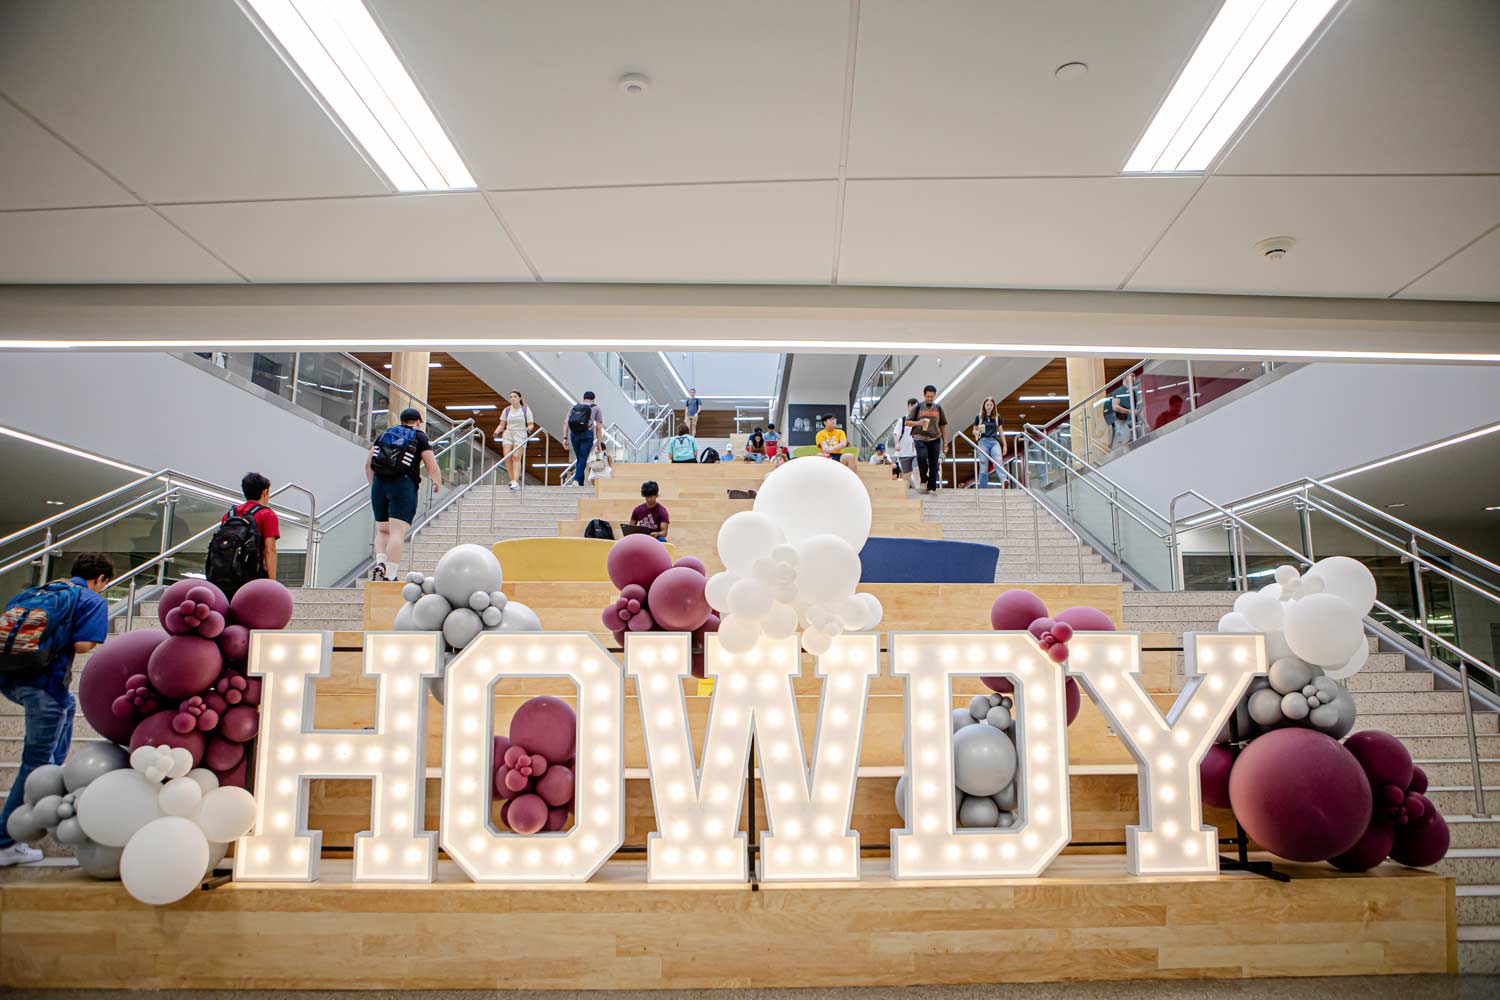 Light-up HOWDY sign on the indoor main staircase of Zachry Engineering Education Complex on the ϲʹ̳ Campus